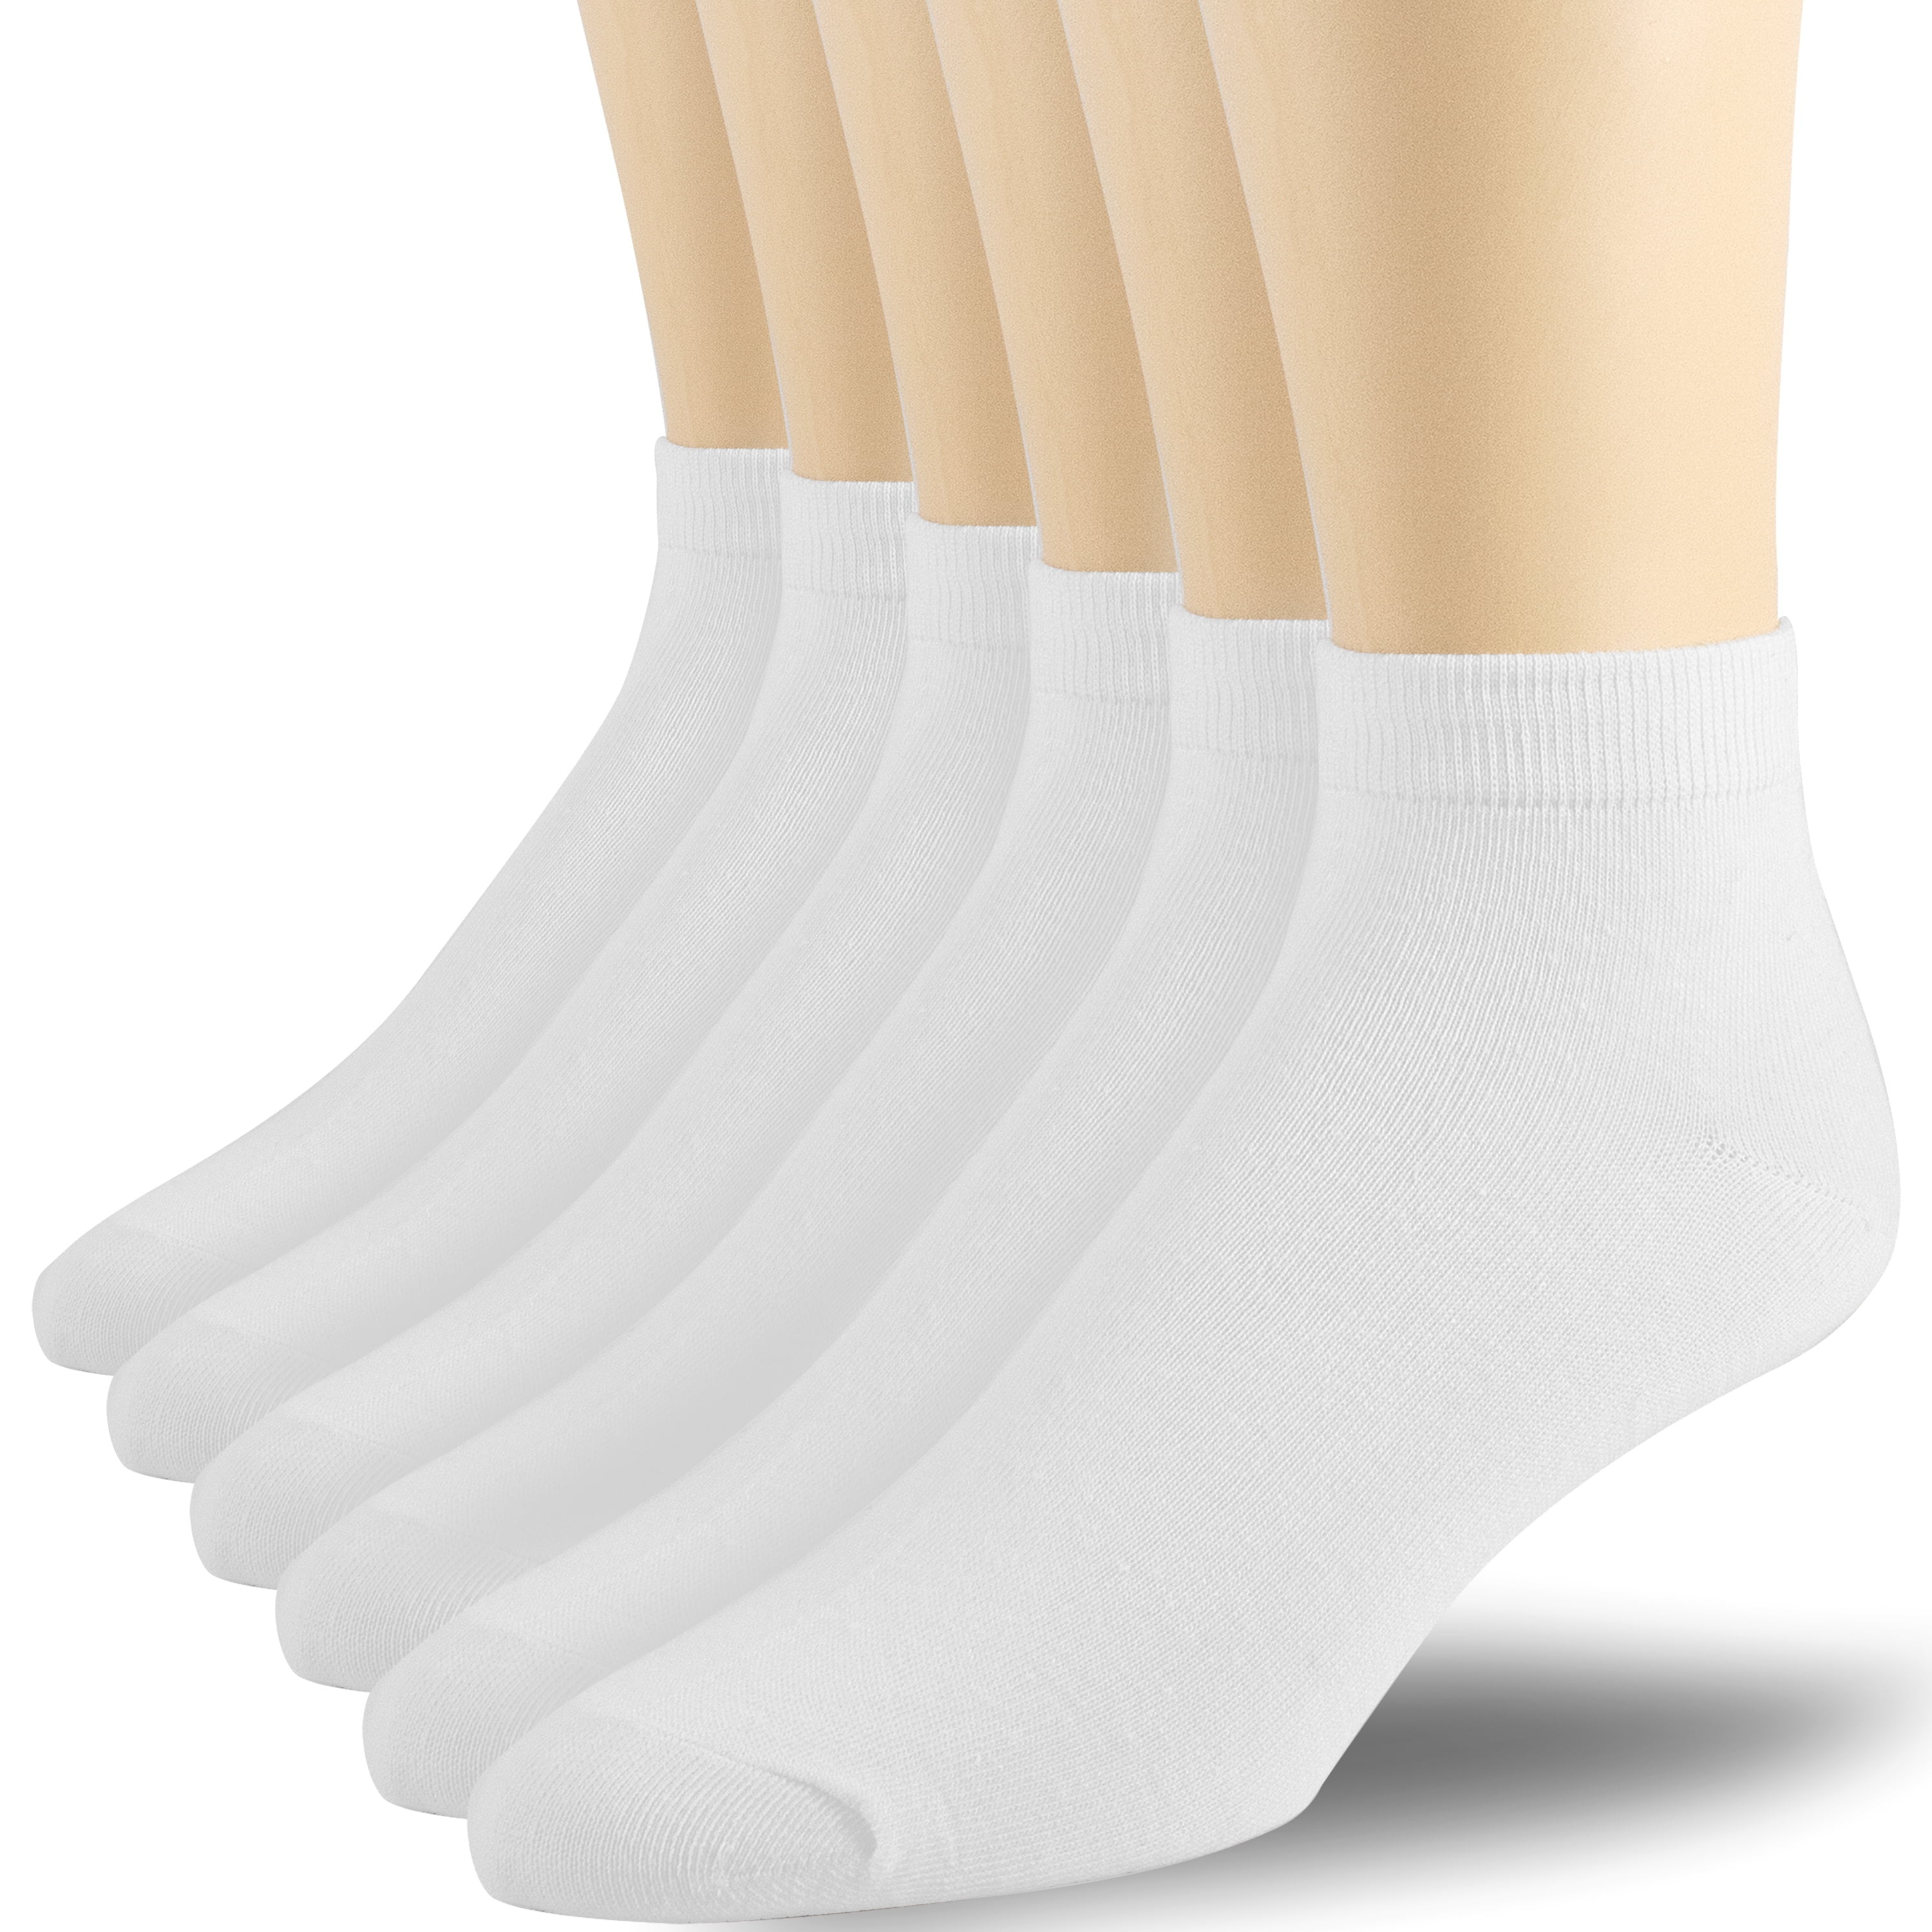 12 Pairs Athletic Thin Cotton Ankle Socks for Men and Women White